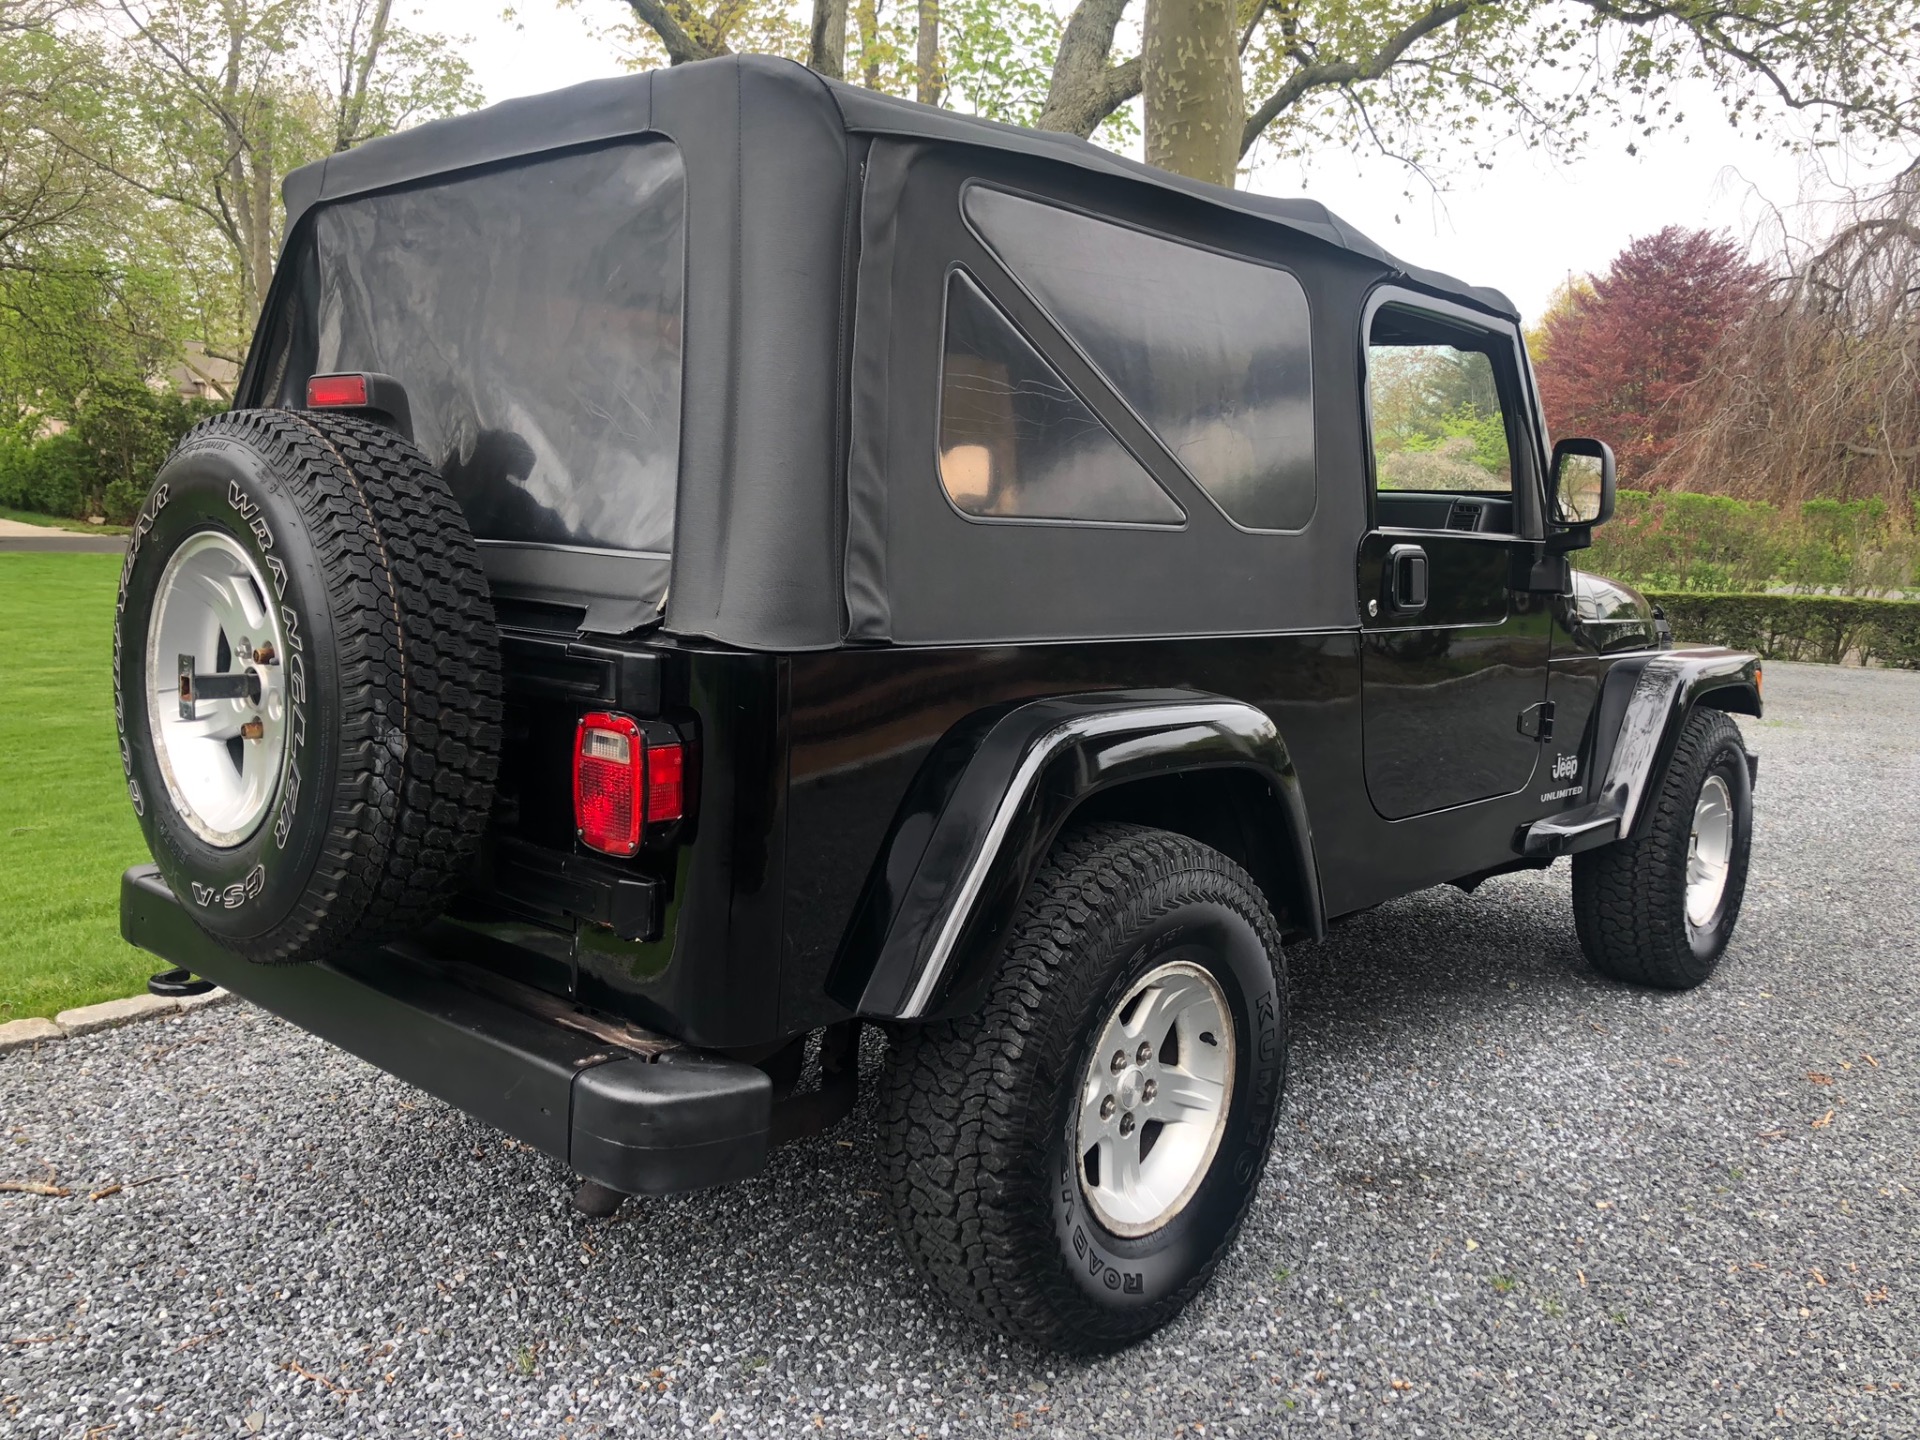 Used 2006 Jeep Wrangler Unlimited LJ Unlimited For Sale ...